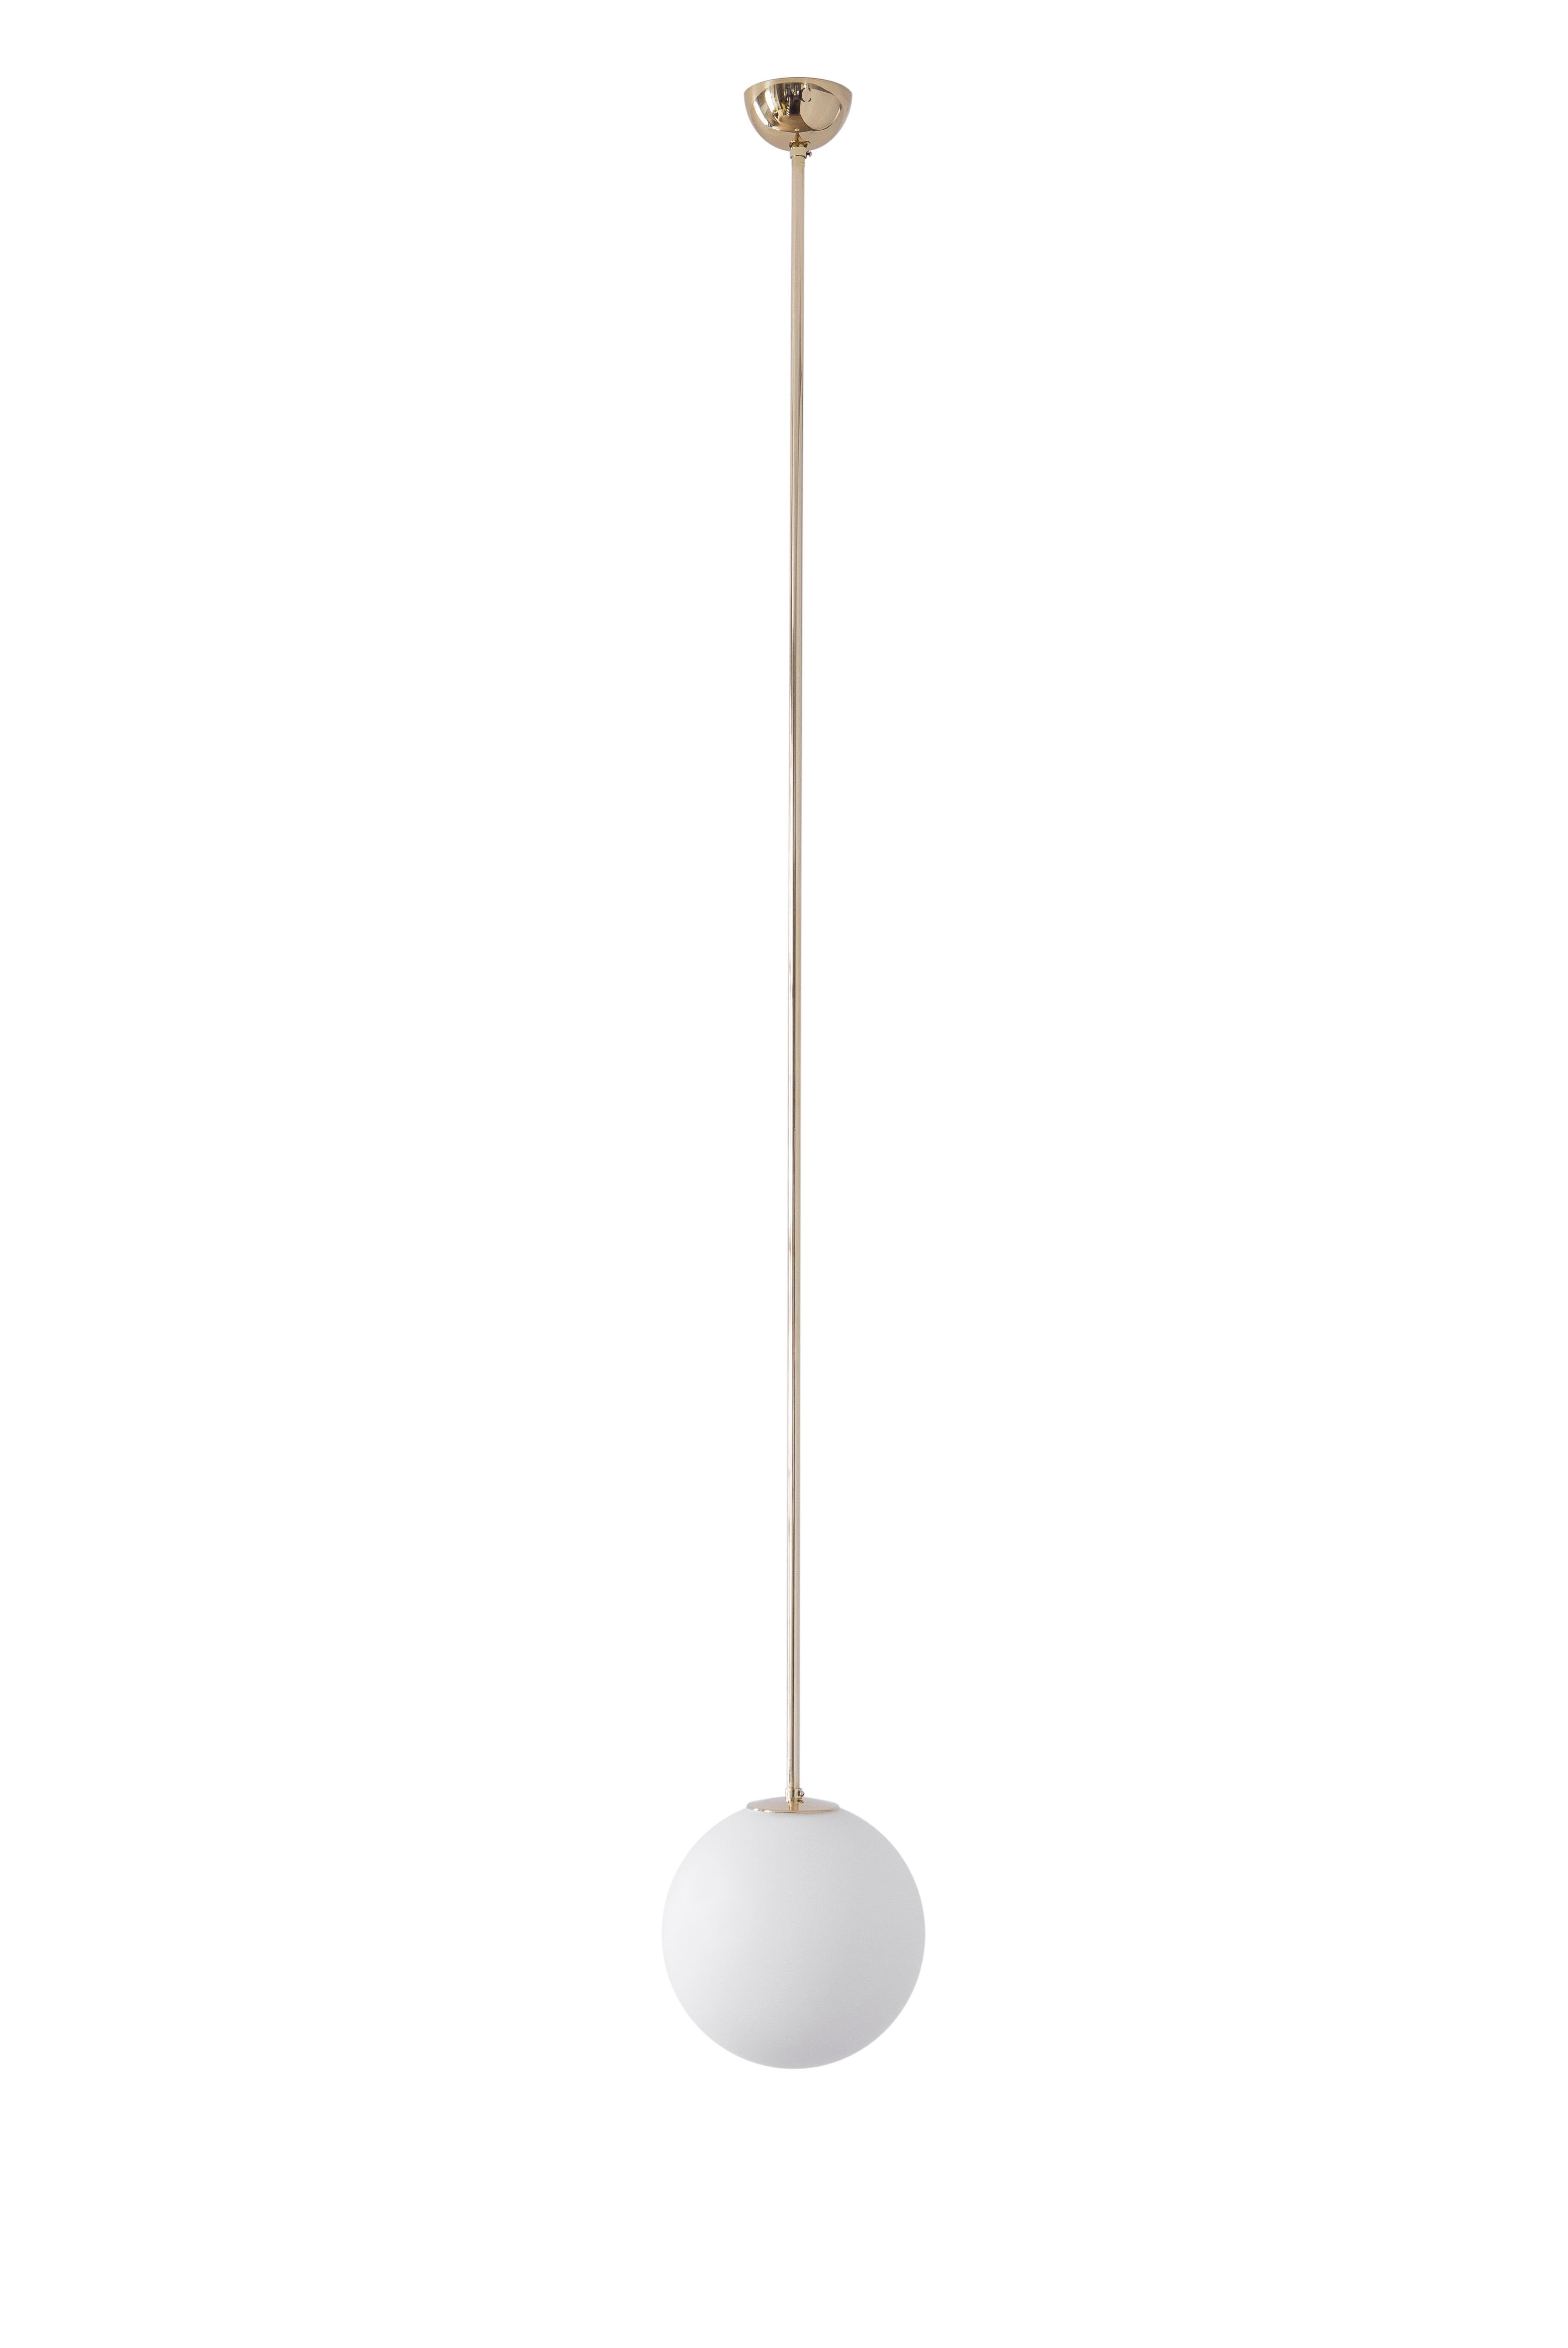 Pendant 06 by Magic Circus Editions
Dimensions: D 25 x W 25 x H 110 cm, also available in H 90, 130, 150, 175, 190 cm
Materials: Brass, mouth blown glass

All our lamps can be wired according to each country. If sold to the USA it will be wired